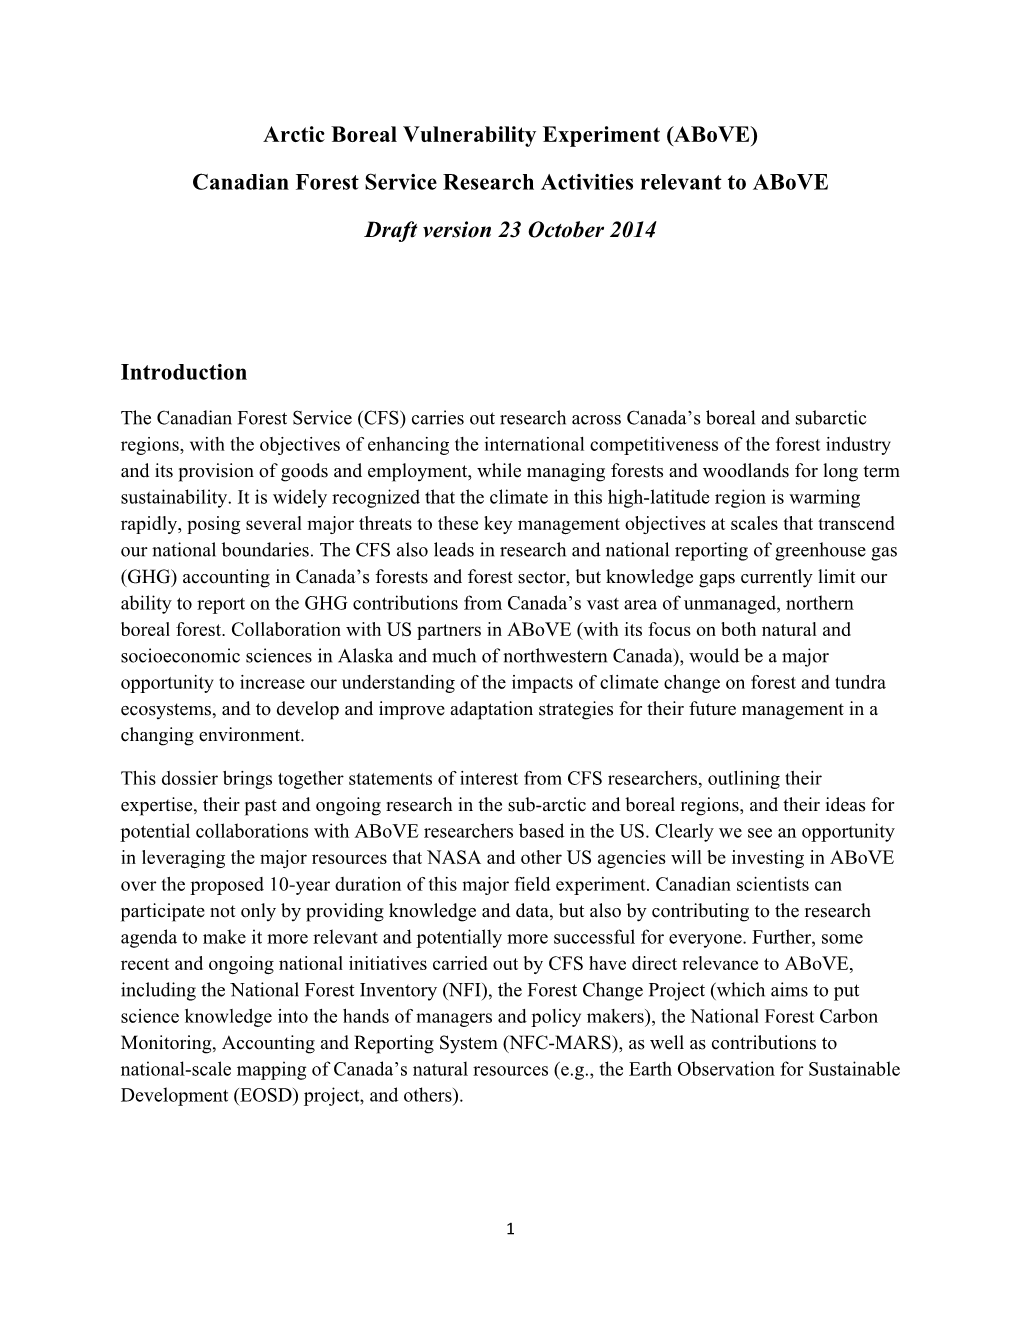 Canadian Forest Service Research Activities Relevant to Above